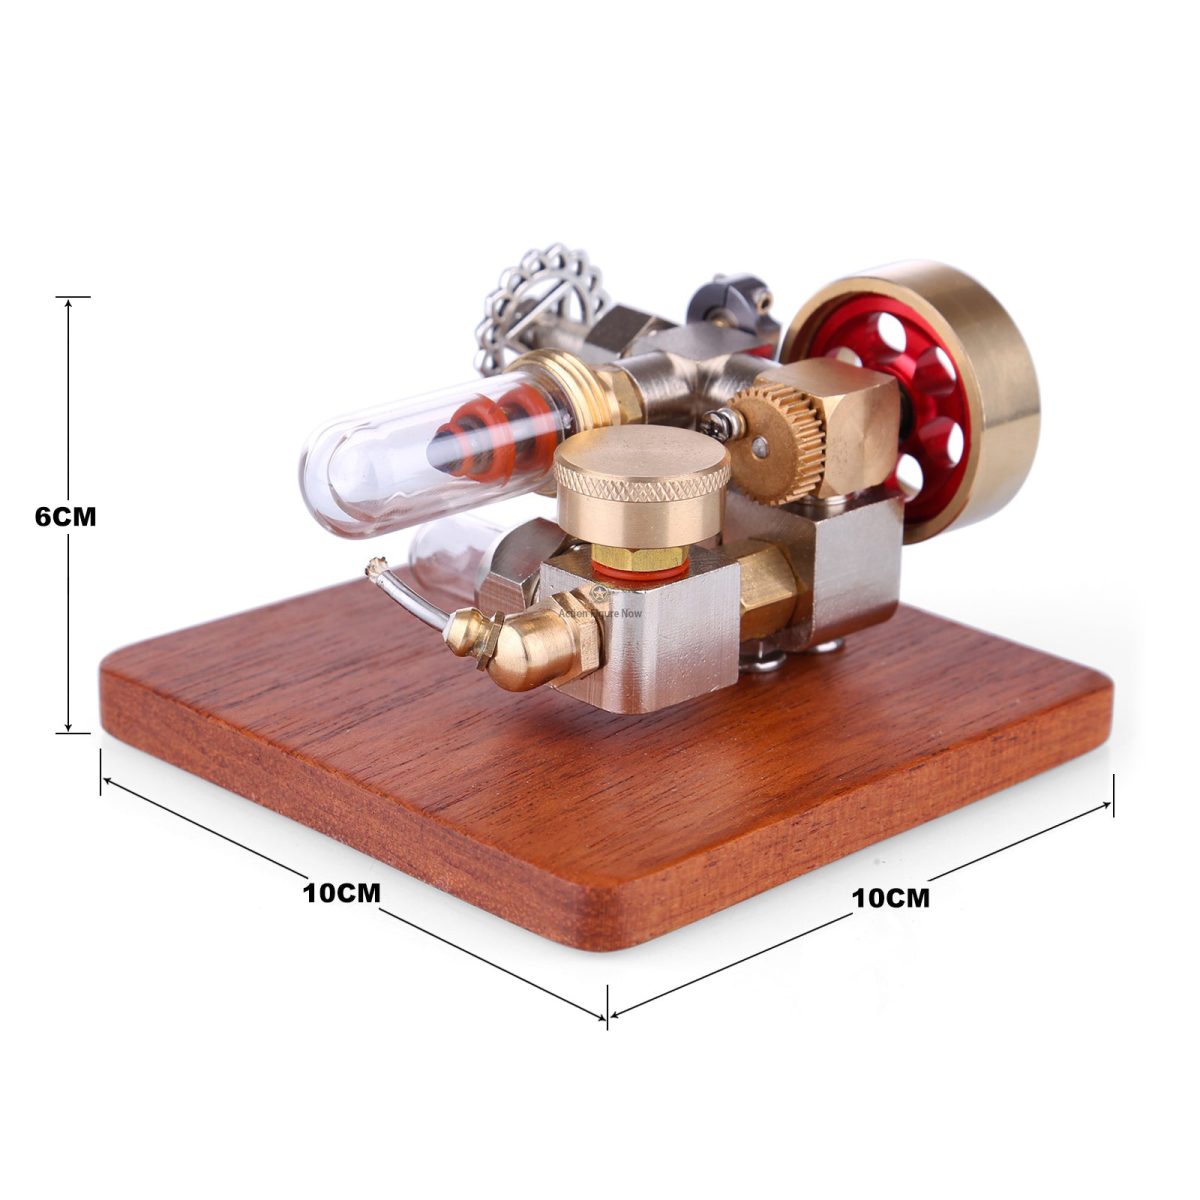 Adjustable Mini Stirling Engine Model with Wooden Base: Educational Toy and Science Experiment